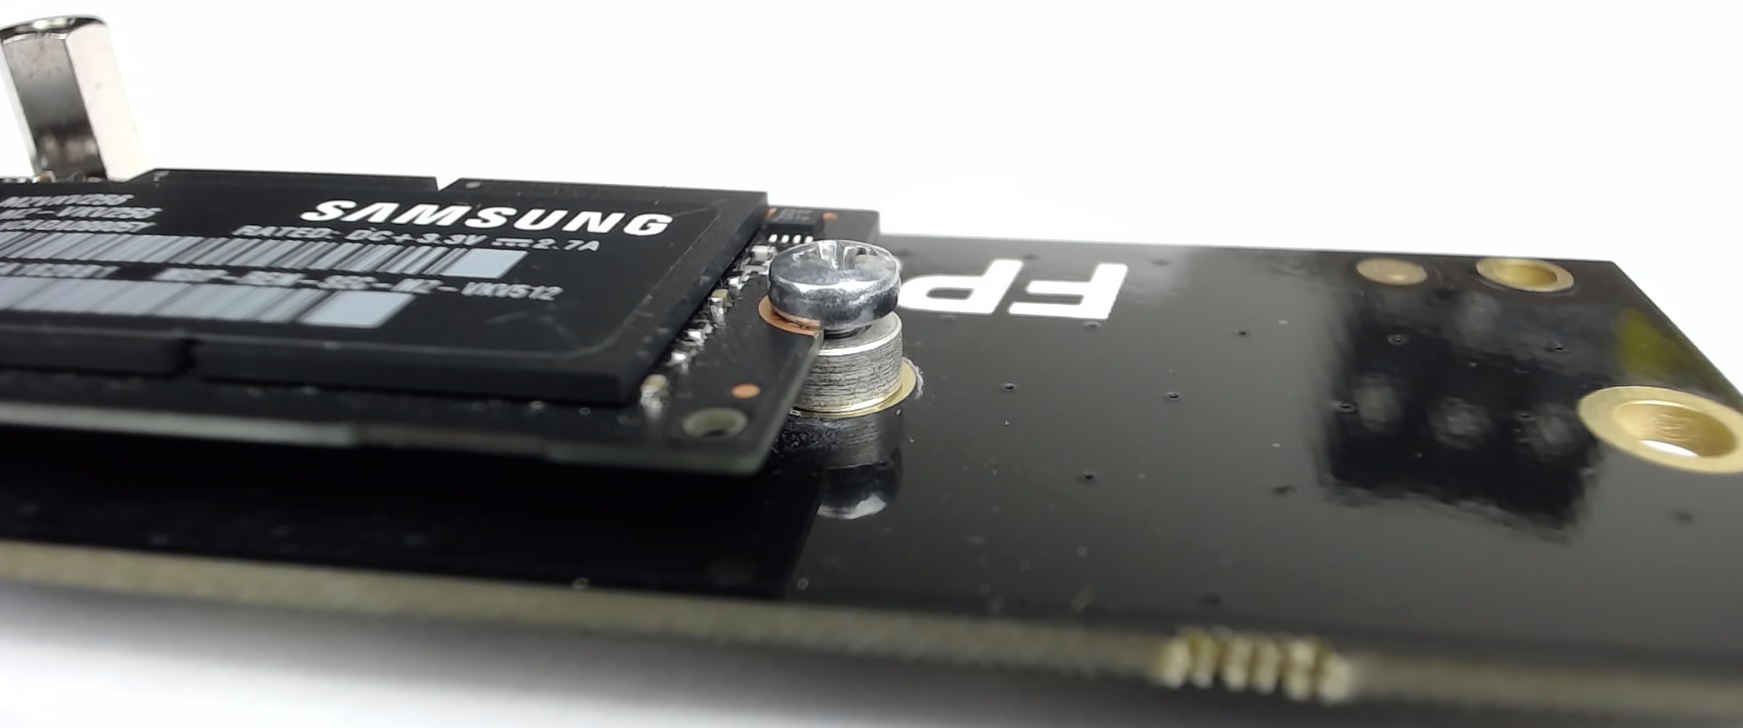 connecting_ssd_to_fpga_running_petalinux_208